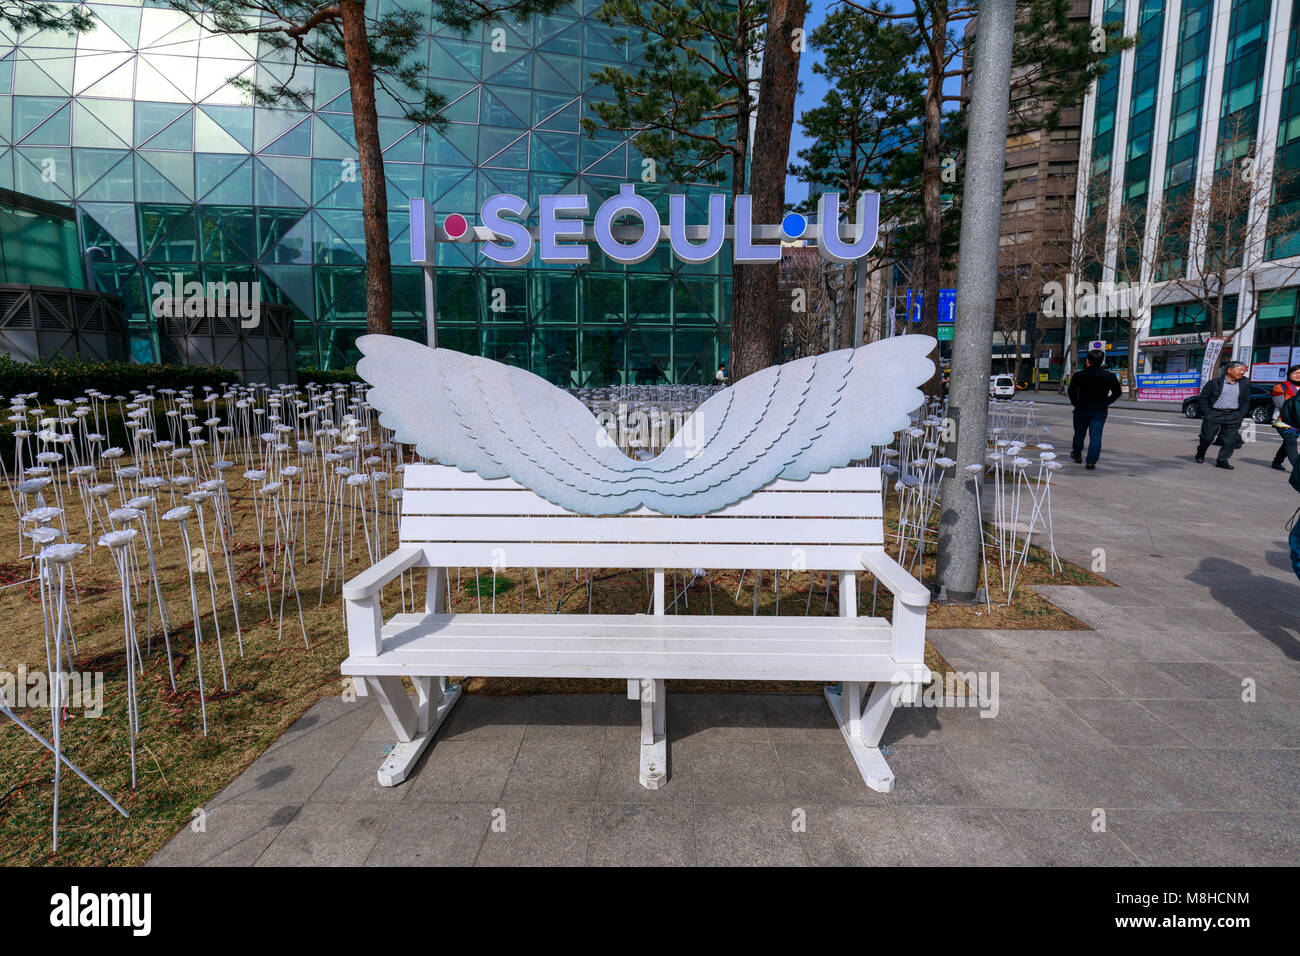 Seoul, South Korea - March 6, 2018 : Street bench with I SEOUL U, which is the new slogan for Seoul city in South Korea Stock Photo